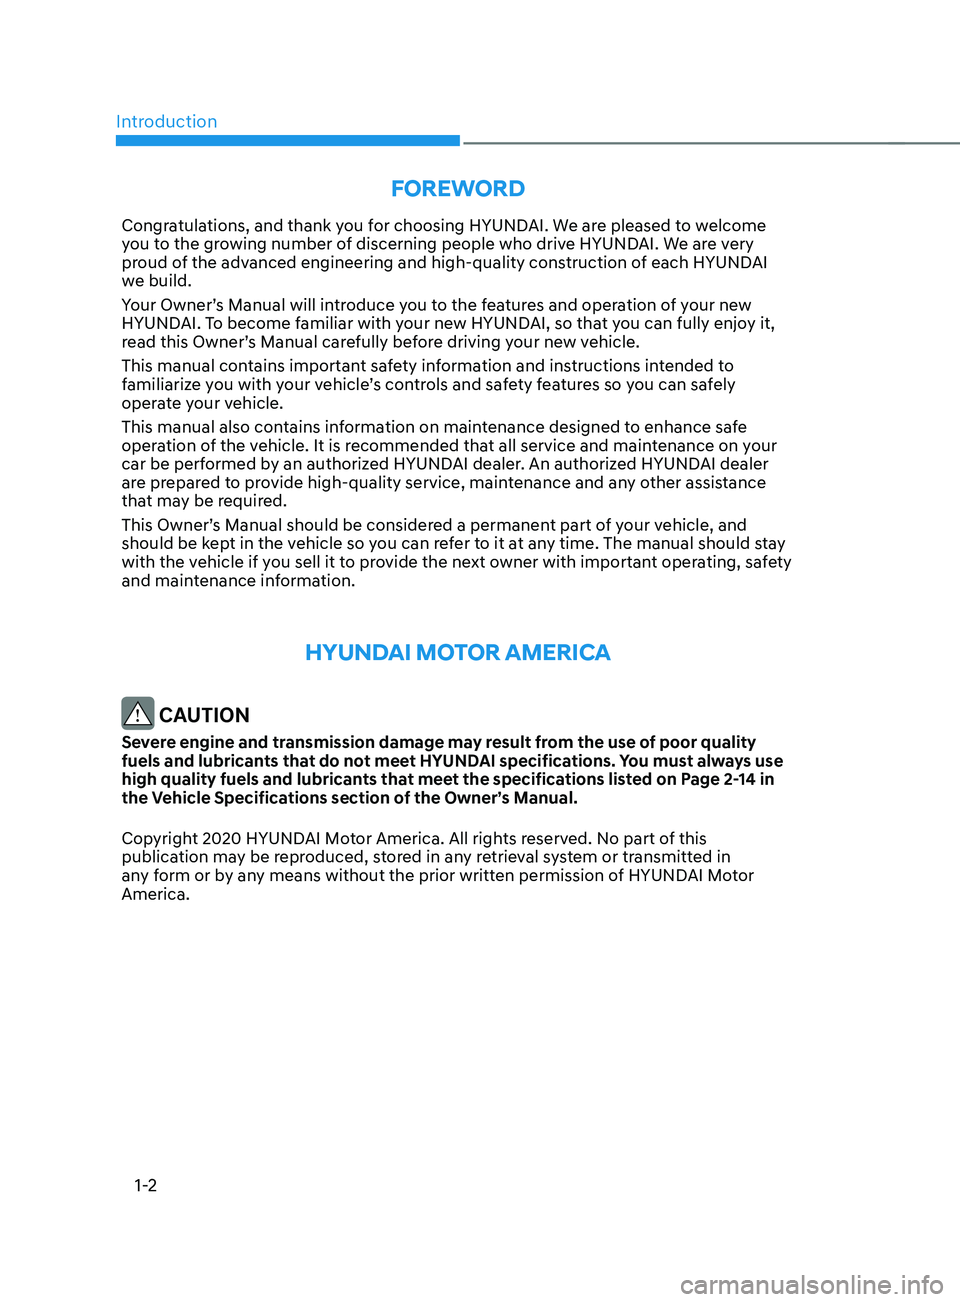 HYUNDAI SANTA FE LIMITED 2021  Owners Manual Introduction
1-2
FOREWORD
Congratulations, and thank you for choosing HYUNDAI. We are pleased to welcome 
you to the growing number of discerning people who drive HYUNDAI. We are very 
proud of the ad